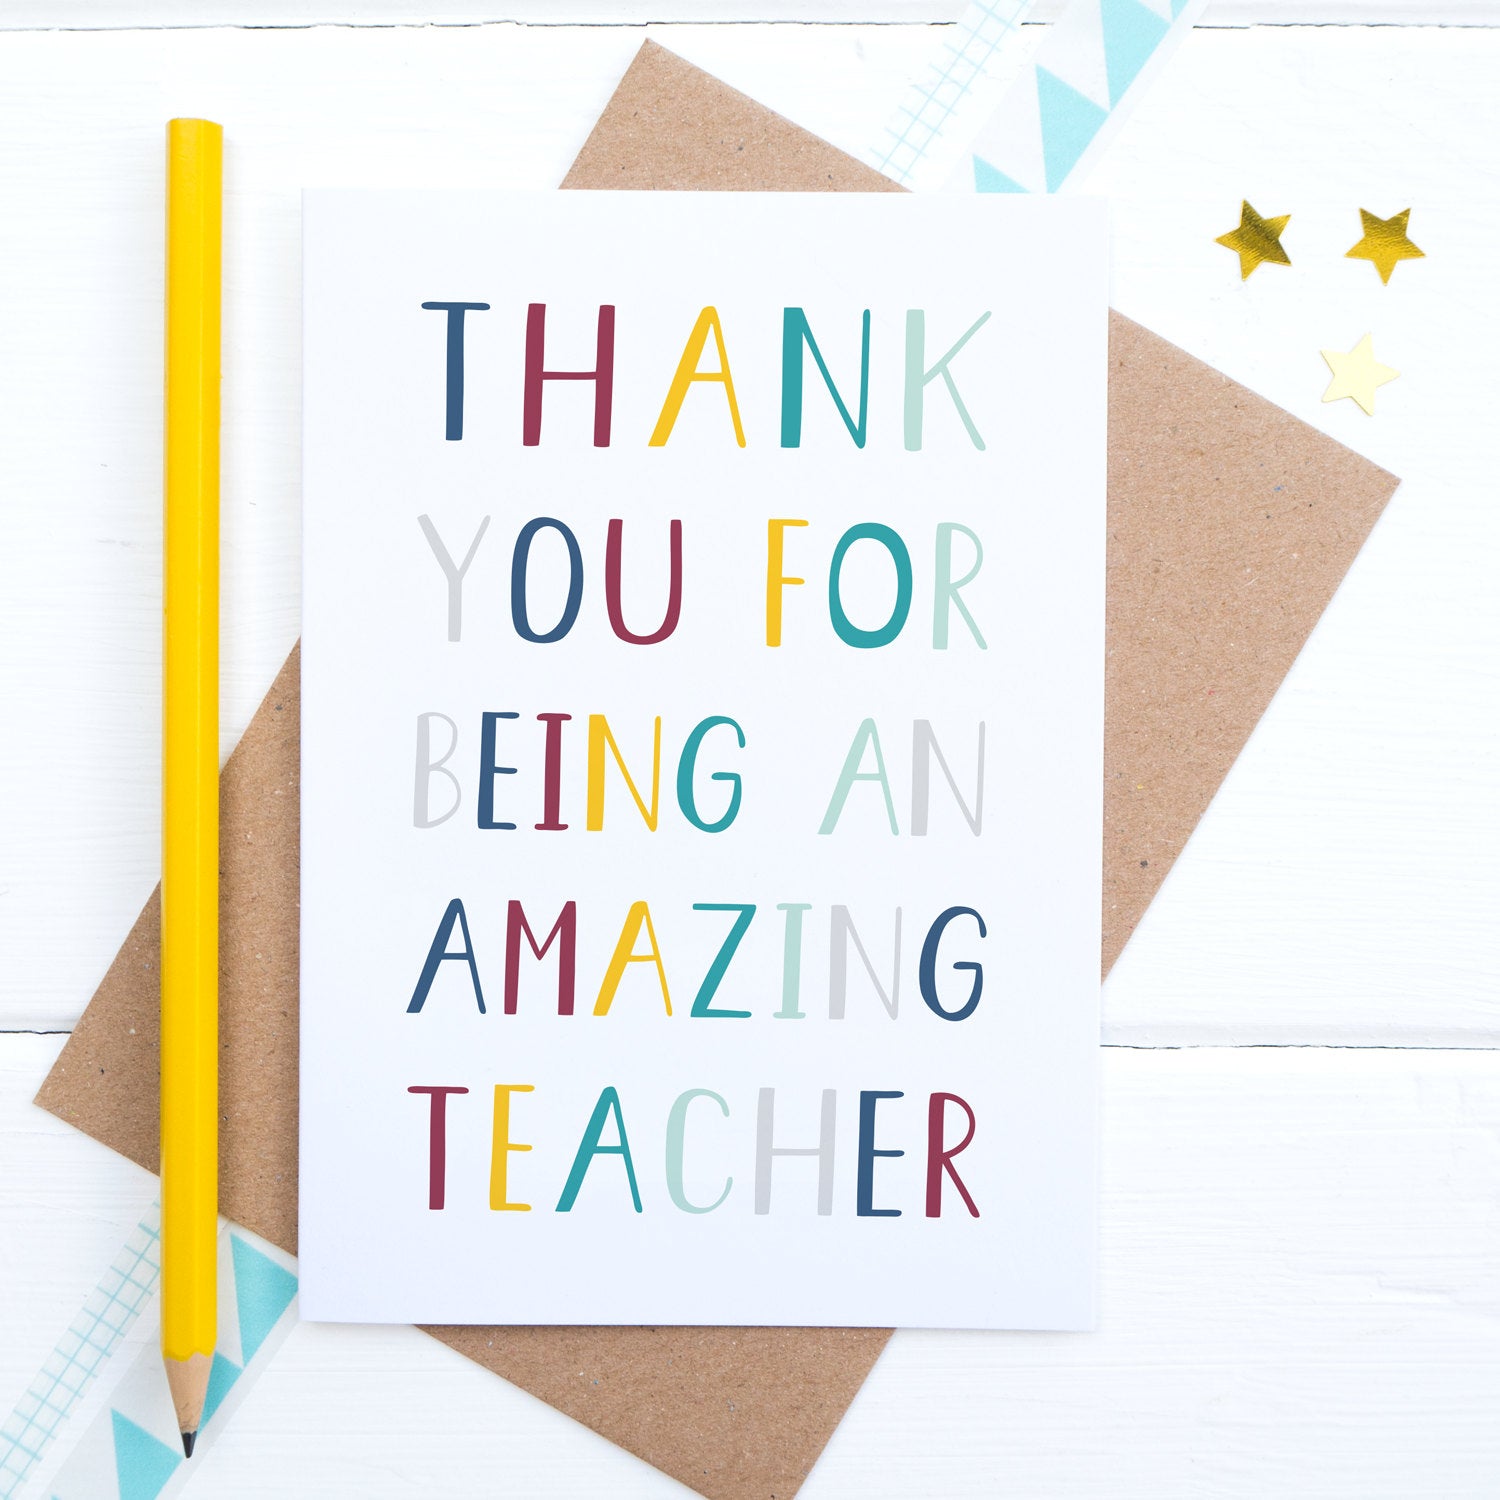 Thank you for being an amazing teacher - end of term thank you card.